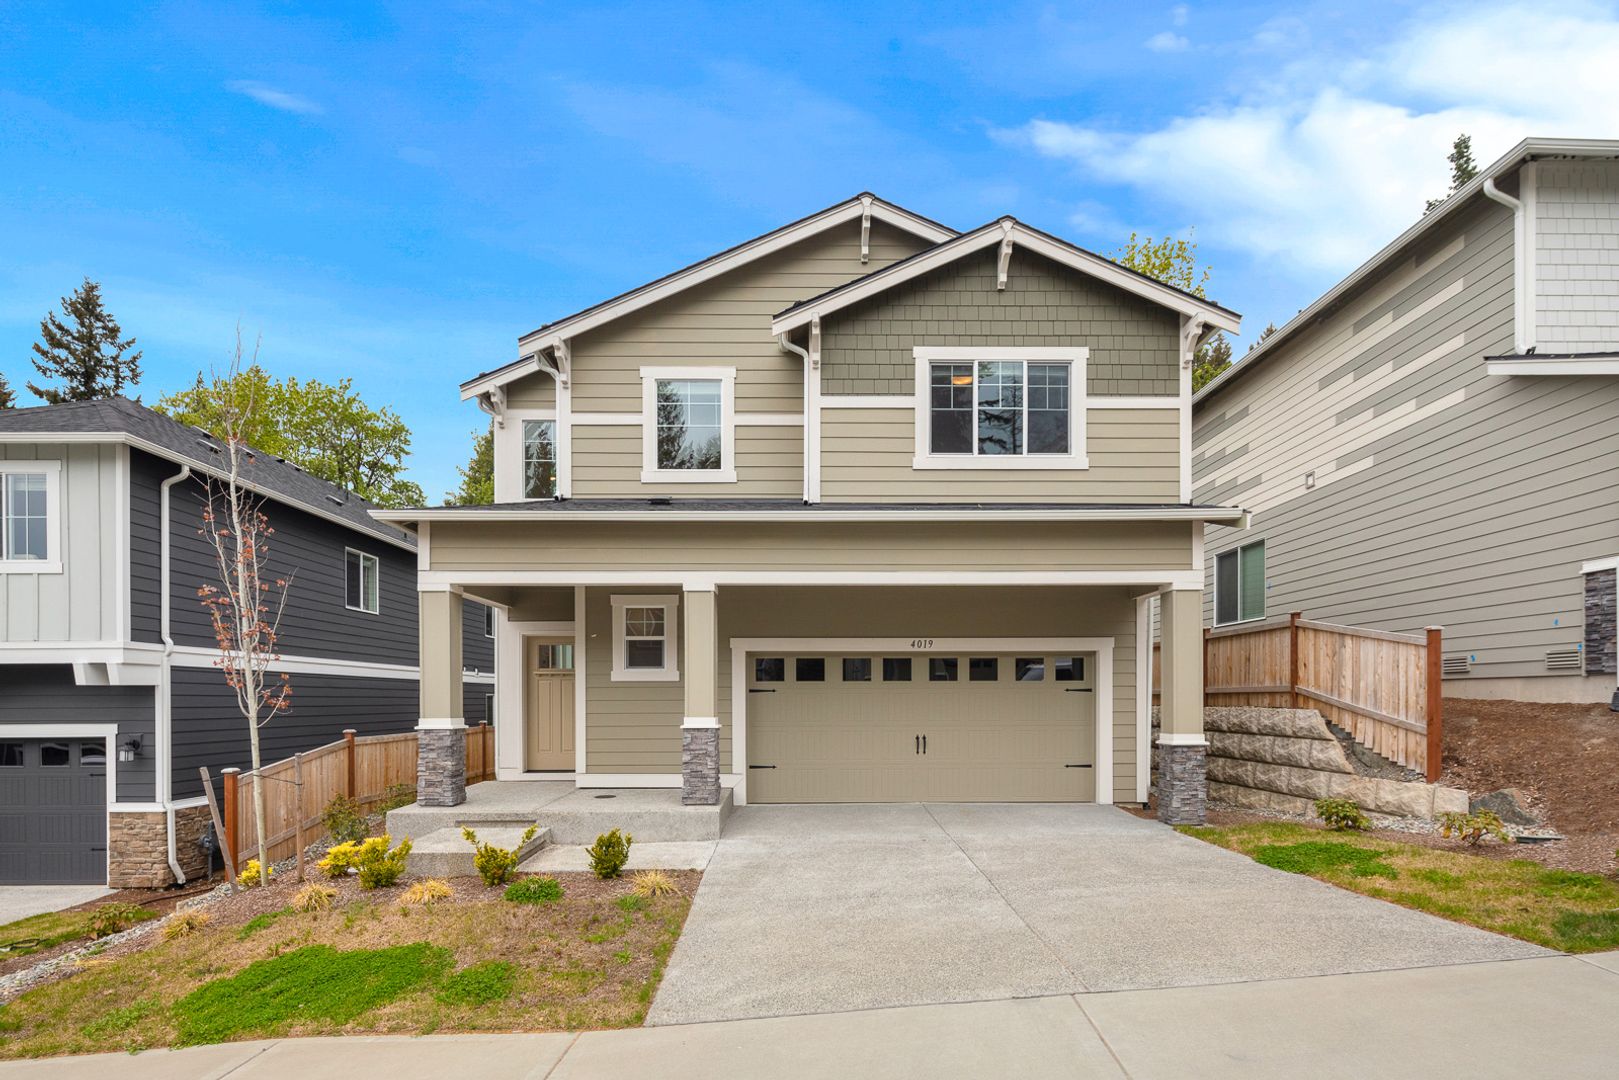 Brand New 4 bedroom 2.5 Bathroom House In Bothell